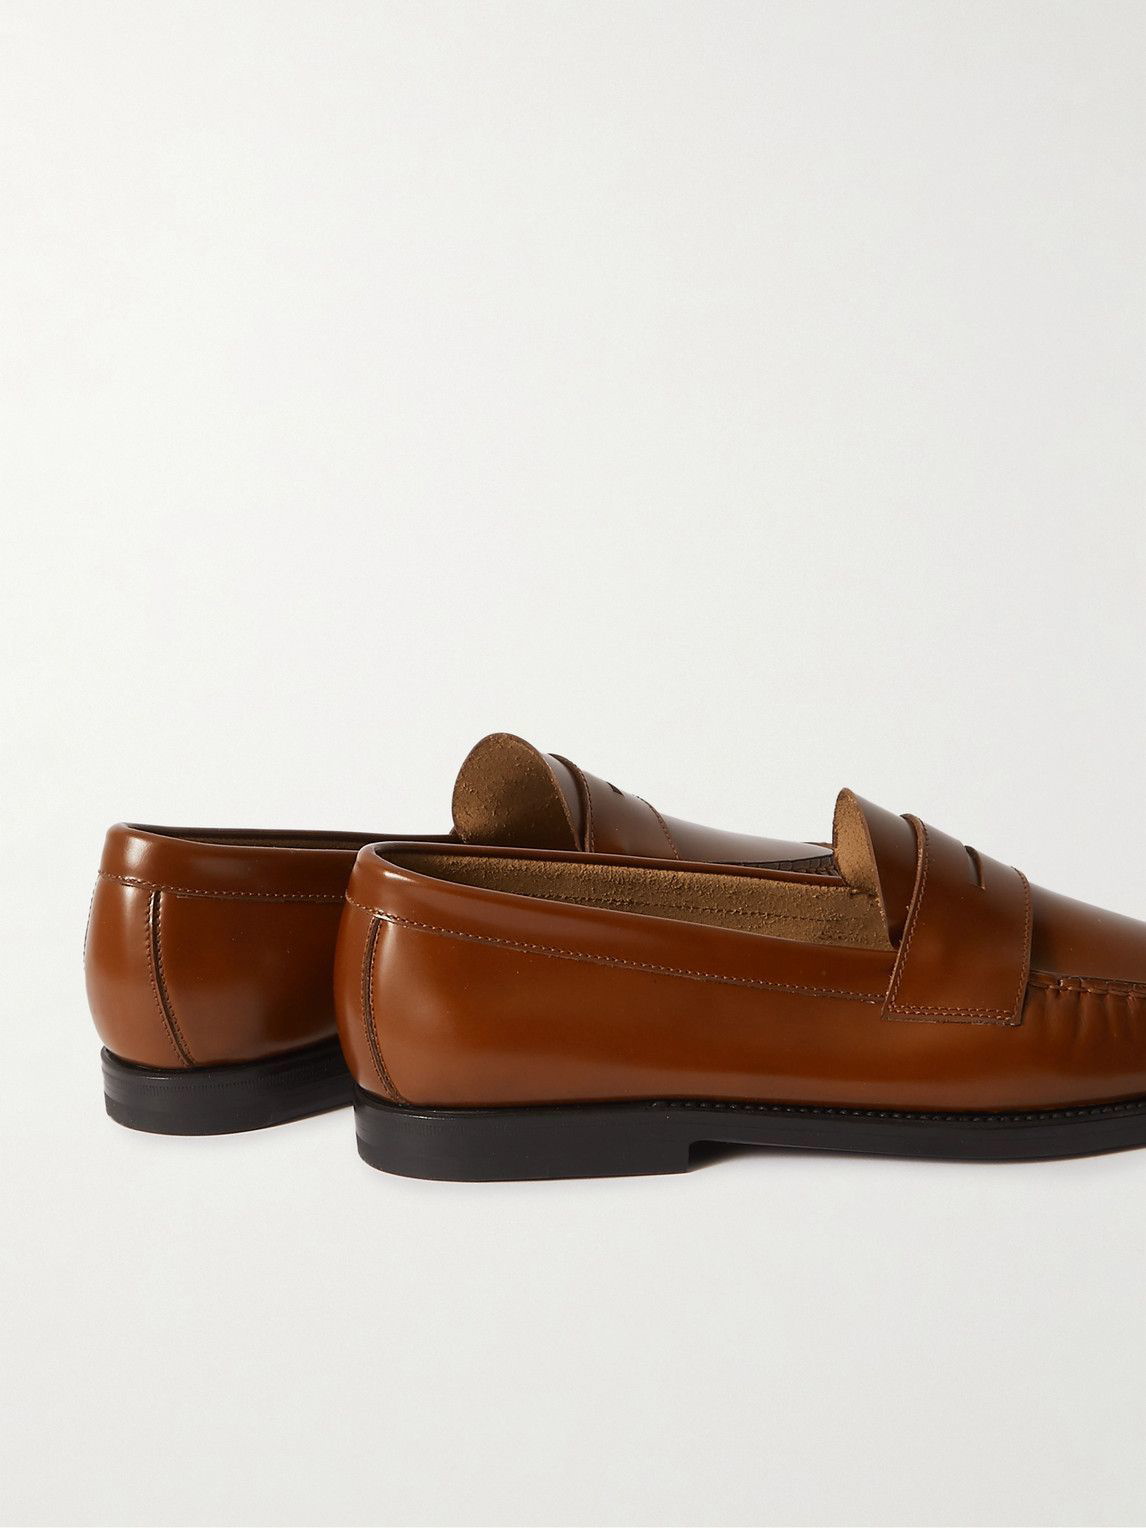 Fear of God - Leather Penny Loafers - Brown